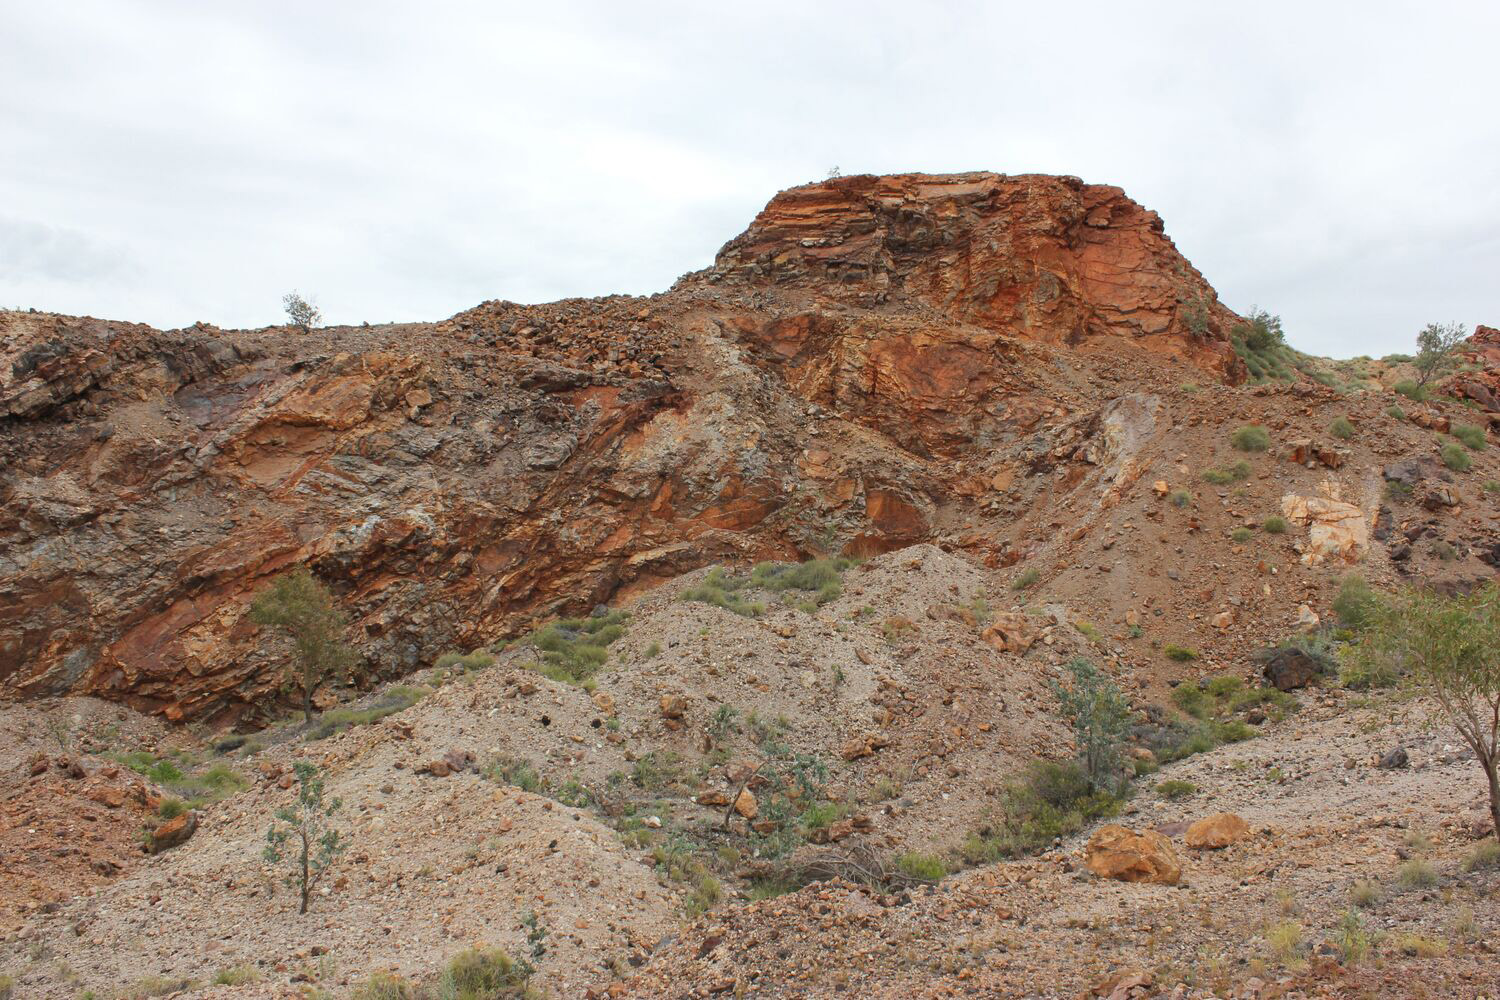 Barite-Quarry-in-the-Dresser-Formation-of-the-Pilbara-Craton.jpg